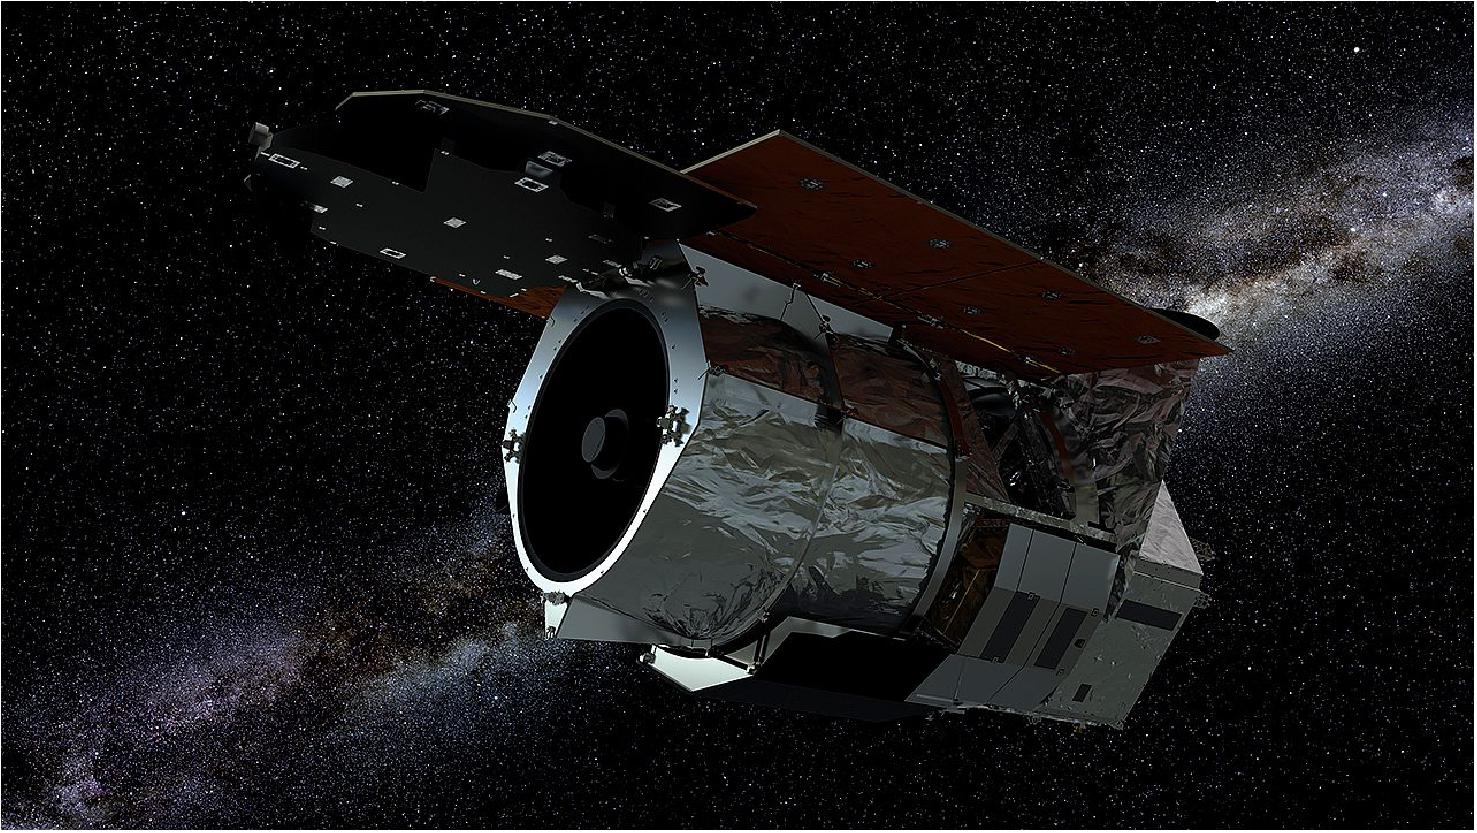 Figure 60: An artist's illustration of the Roman Space Telescope against a starry background, formerly WFIRST. It will revolutionize astronomy by building on the science discoveries and technological leaps of the Hubble and James Webb space telescopes (image credit: NASA/GSFC)